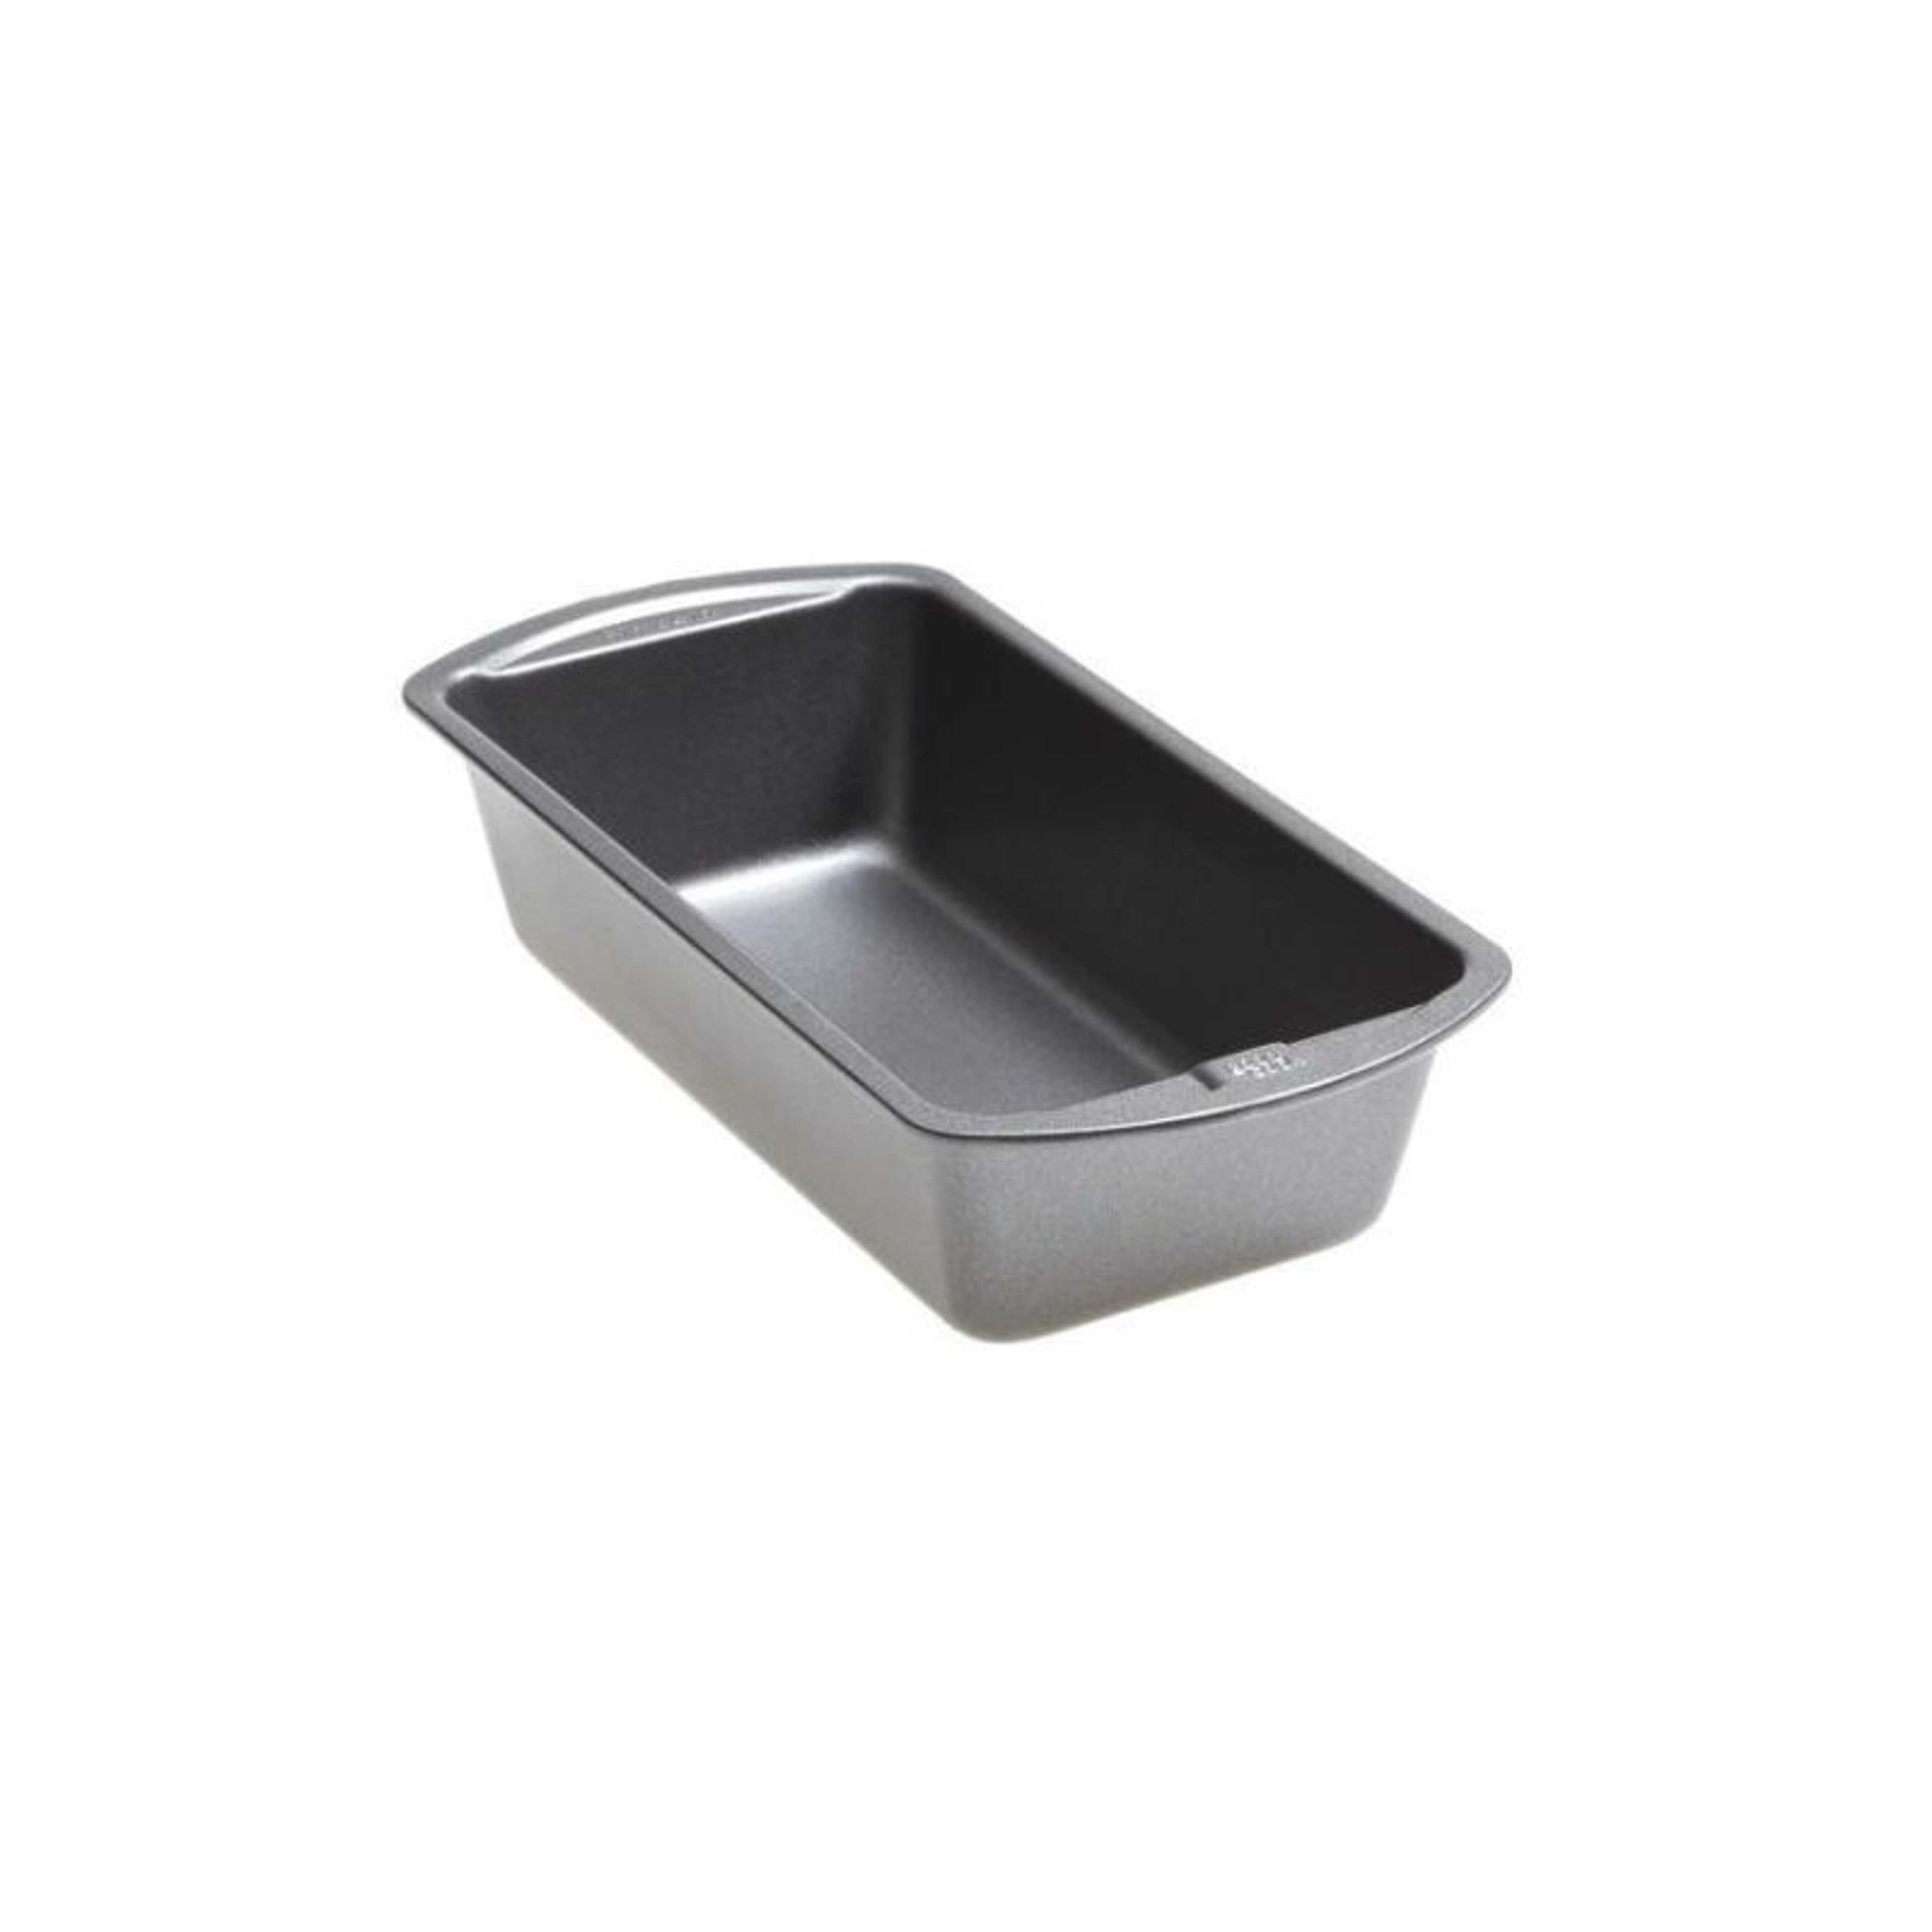 Non Stick Bakeware Baking Trays & Bread Pans And Loaf Pans - Silver